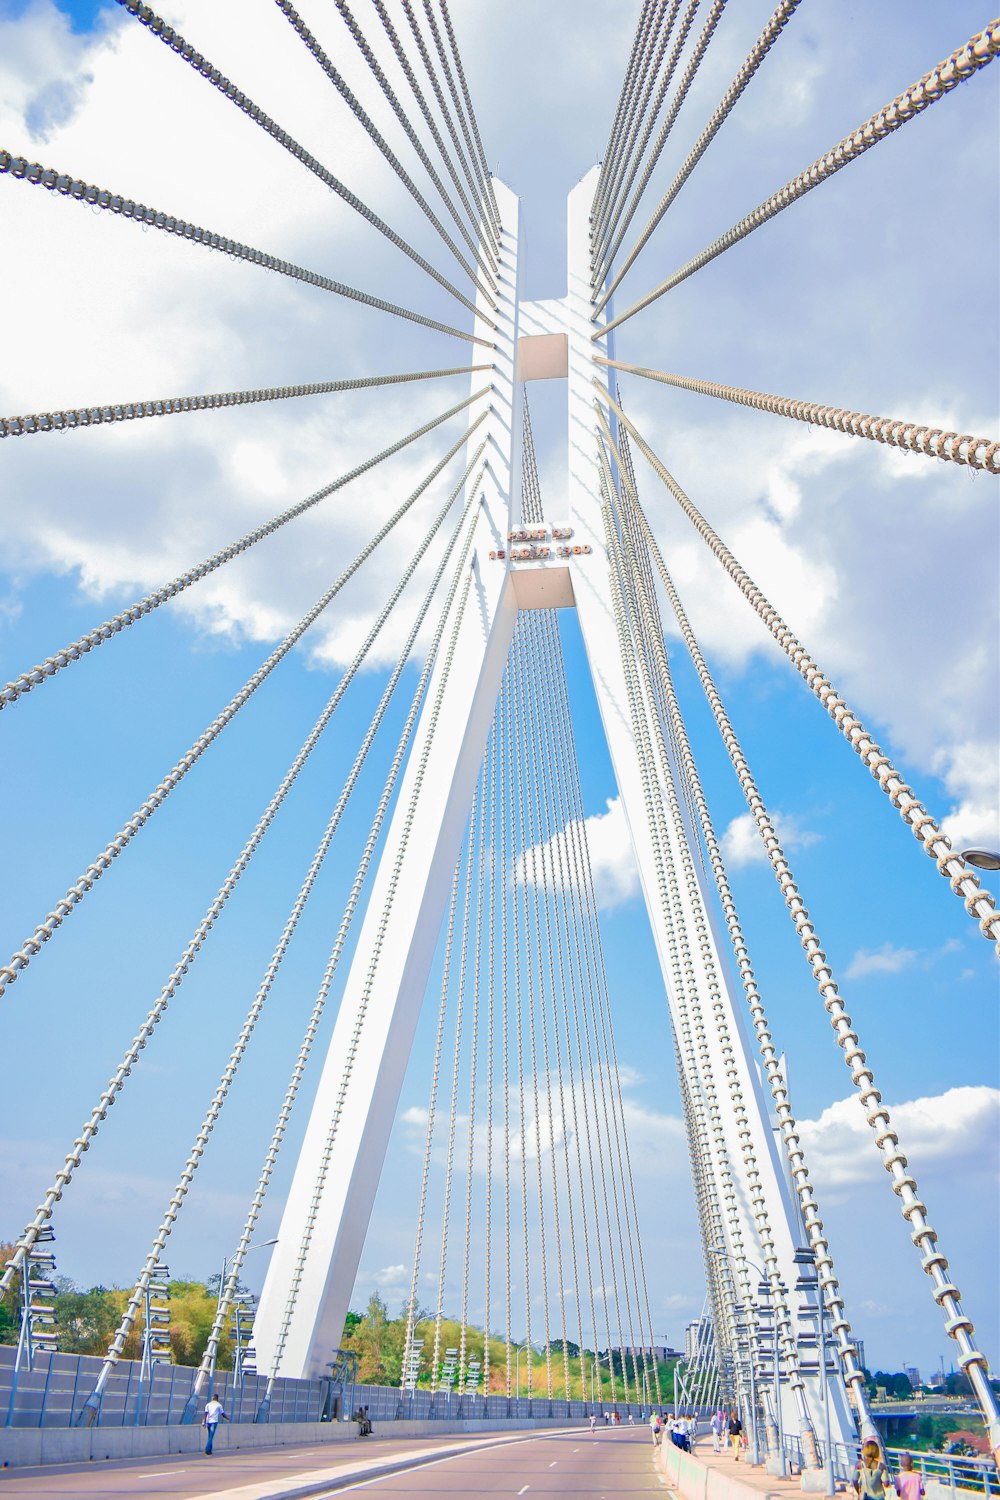 a view of a very tall bridge from the ground